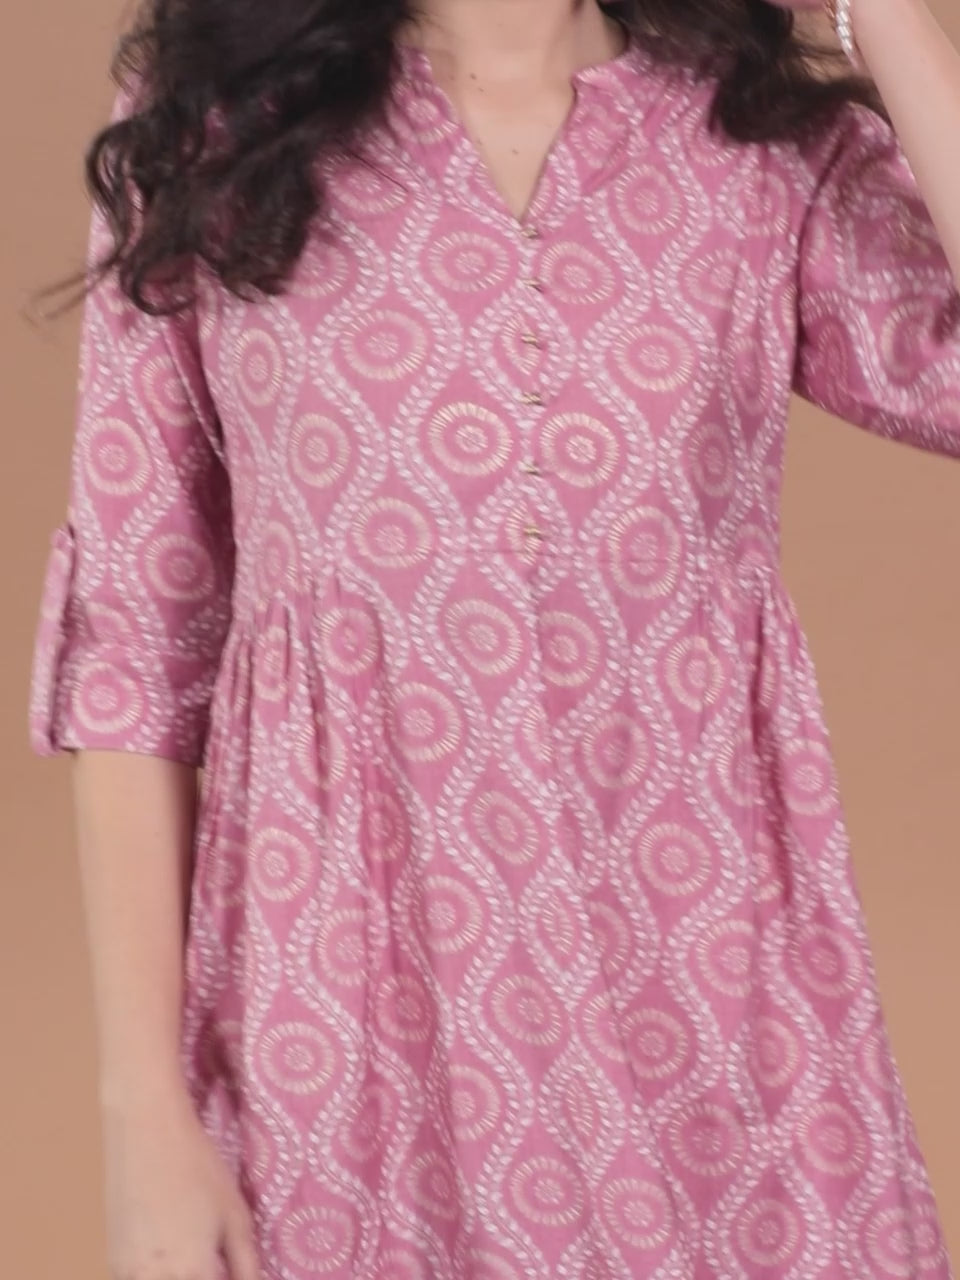 Pink Printed Silk Fit and Flare Dress